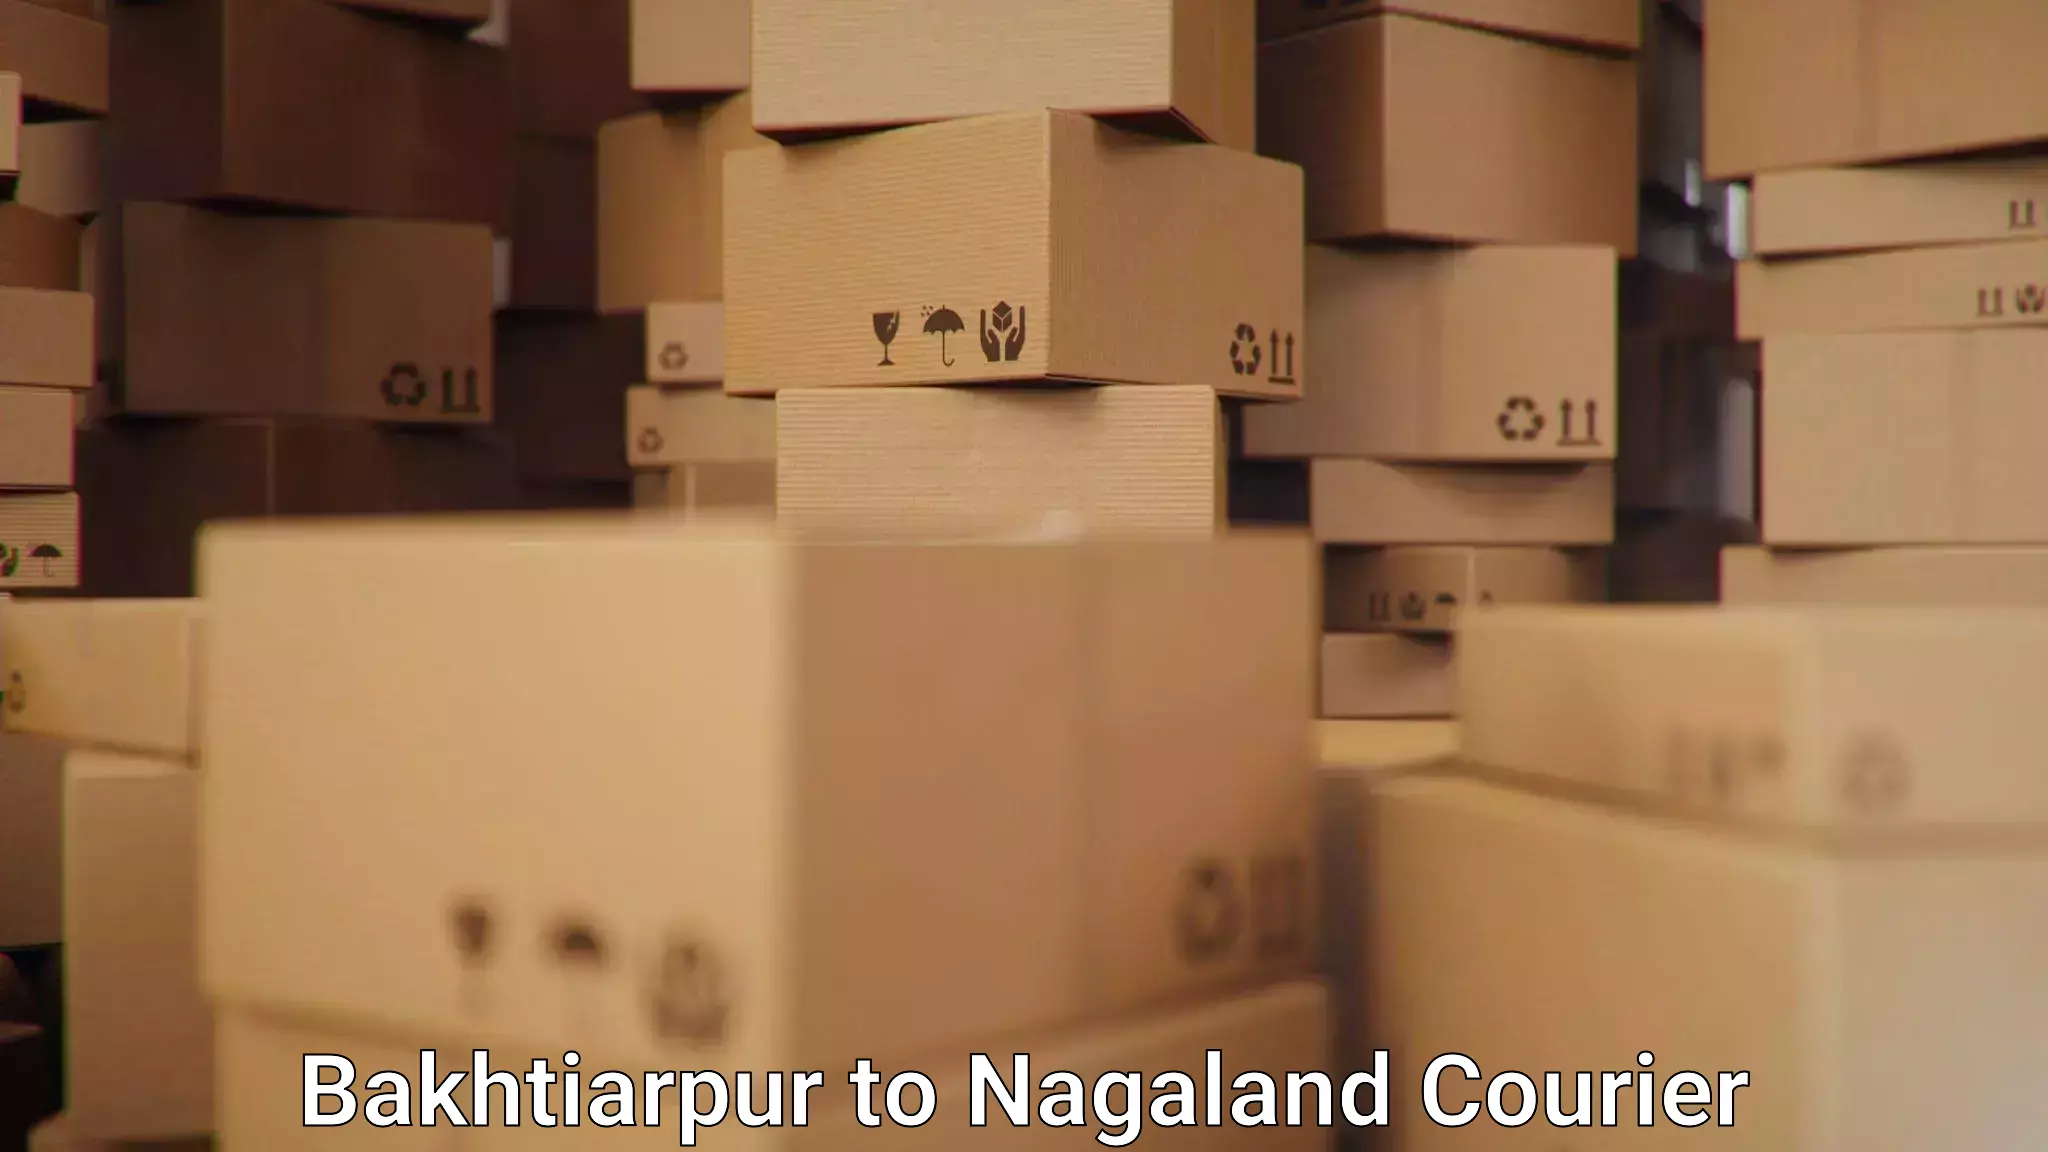 Courier service partnerships in Bakhtiarpur to Nagaland